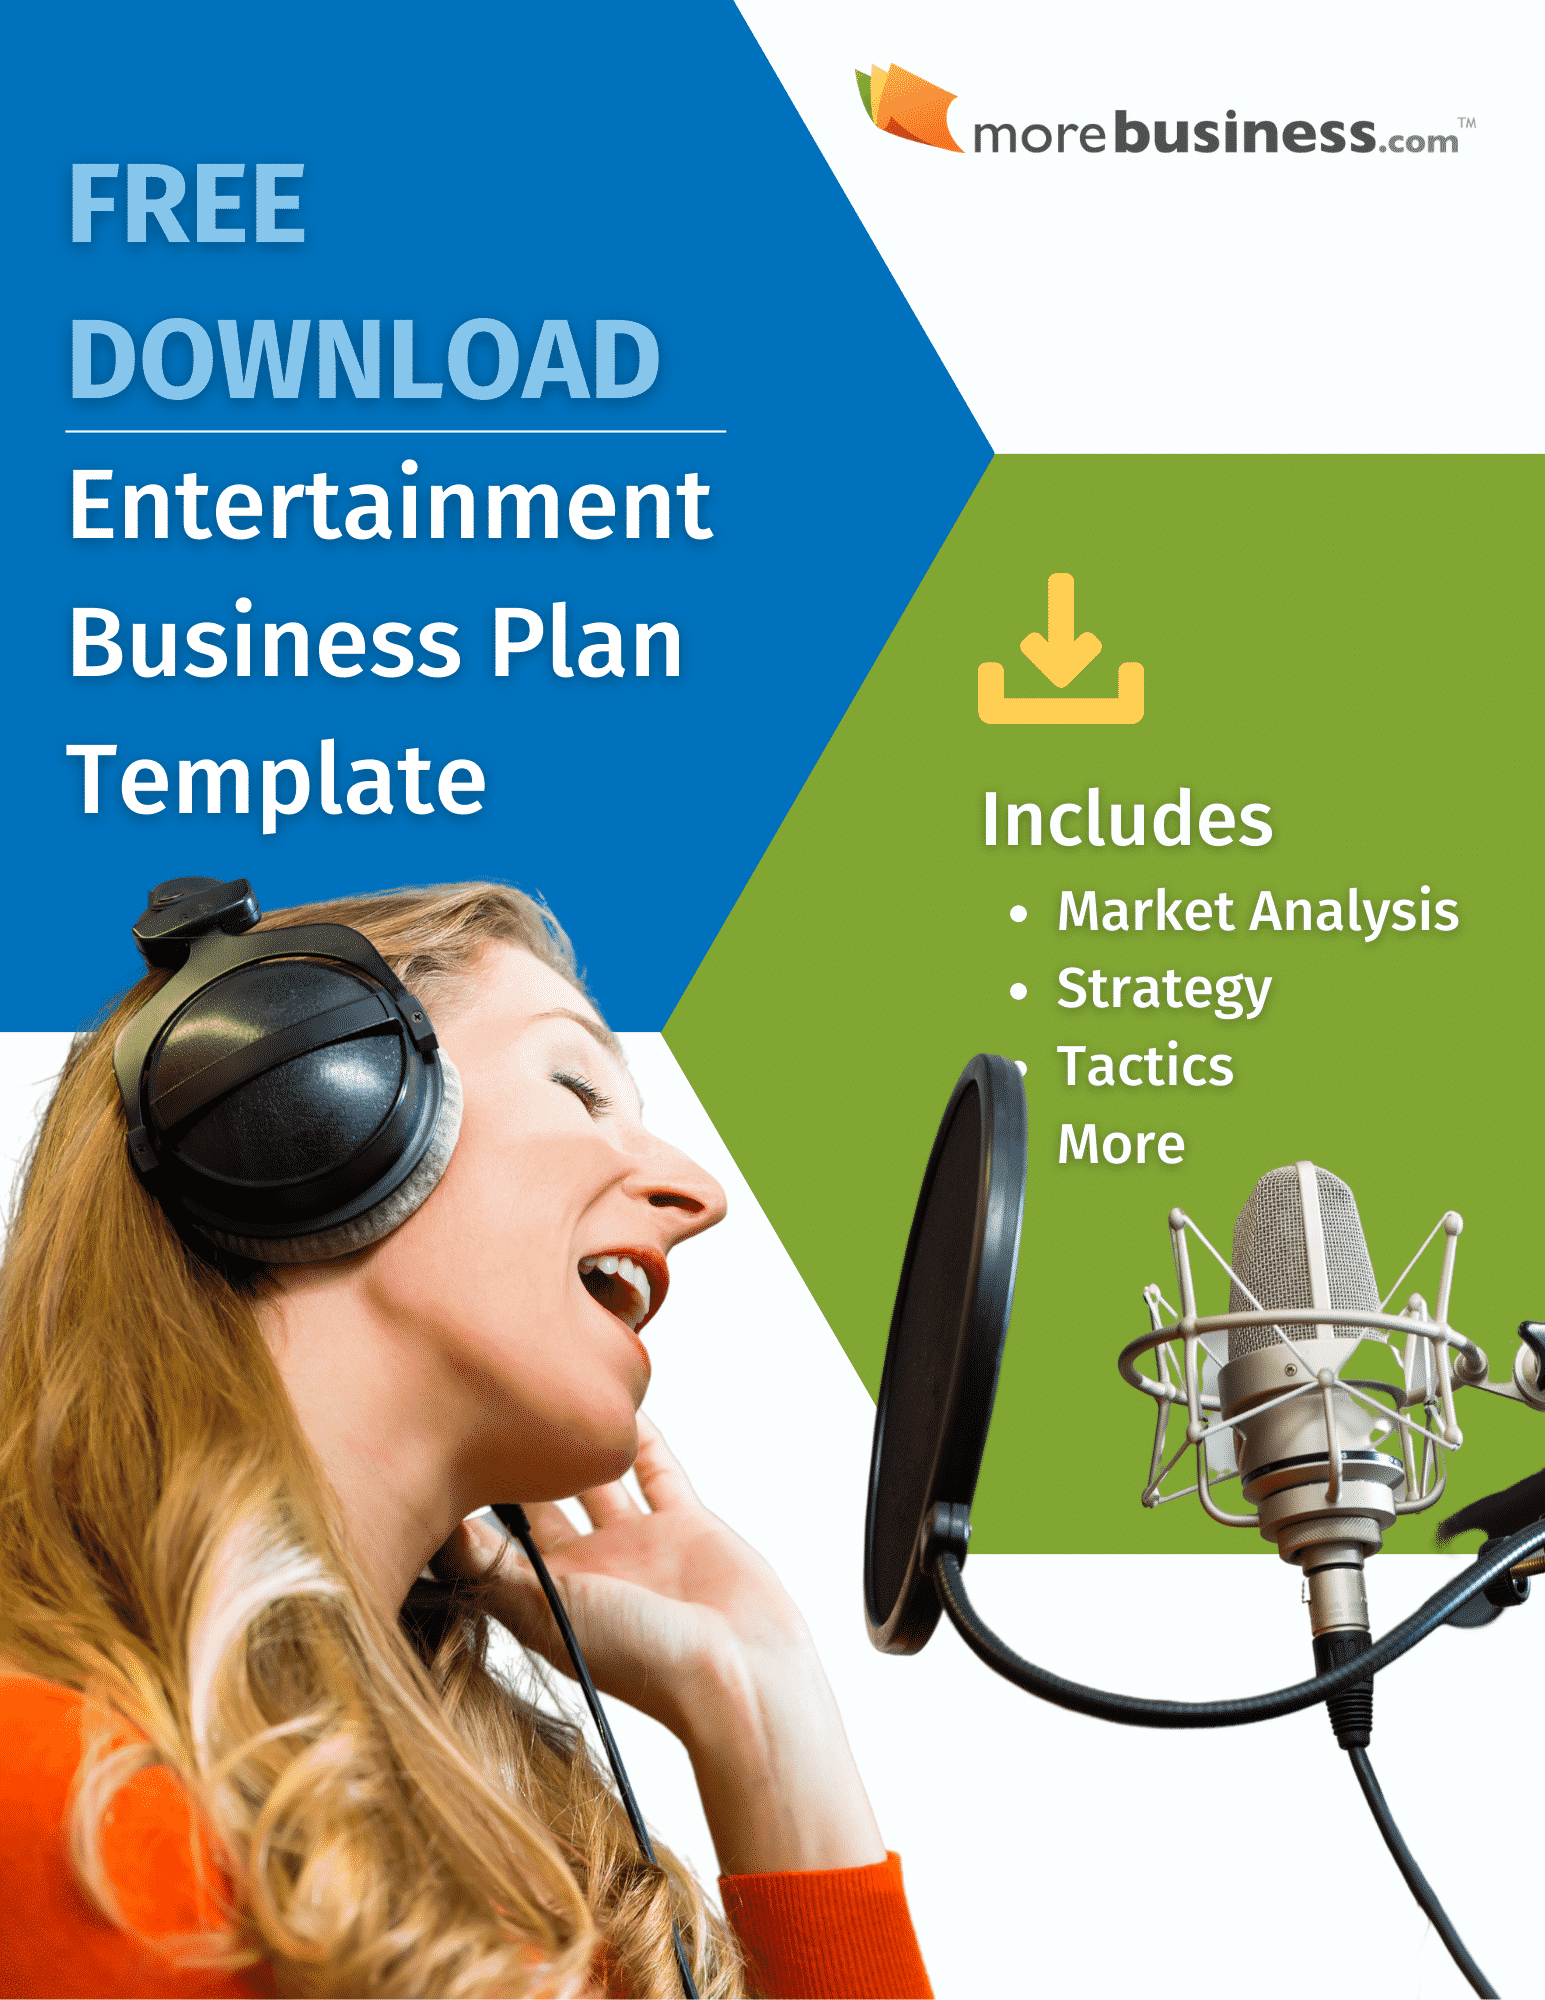 Entertainment Business Plan Example  MoreBusiness.com Pertaining To Music Business Plan Template Free Download